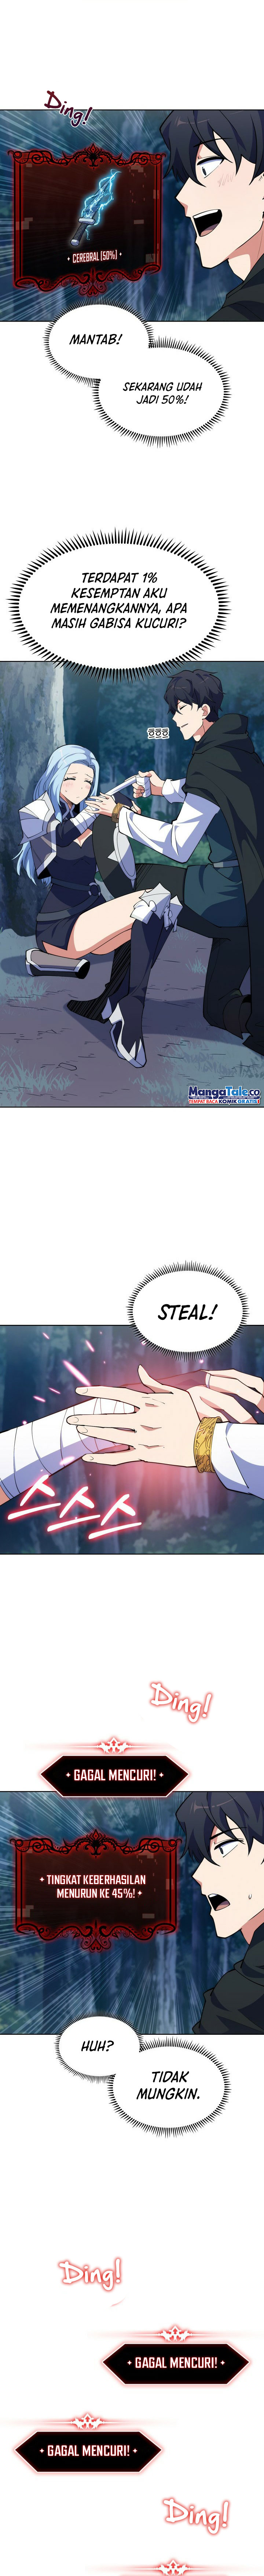 I'M Going To Steal Again Today Chapter 09 - 117